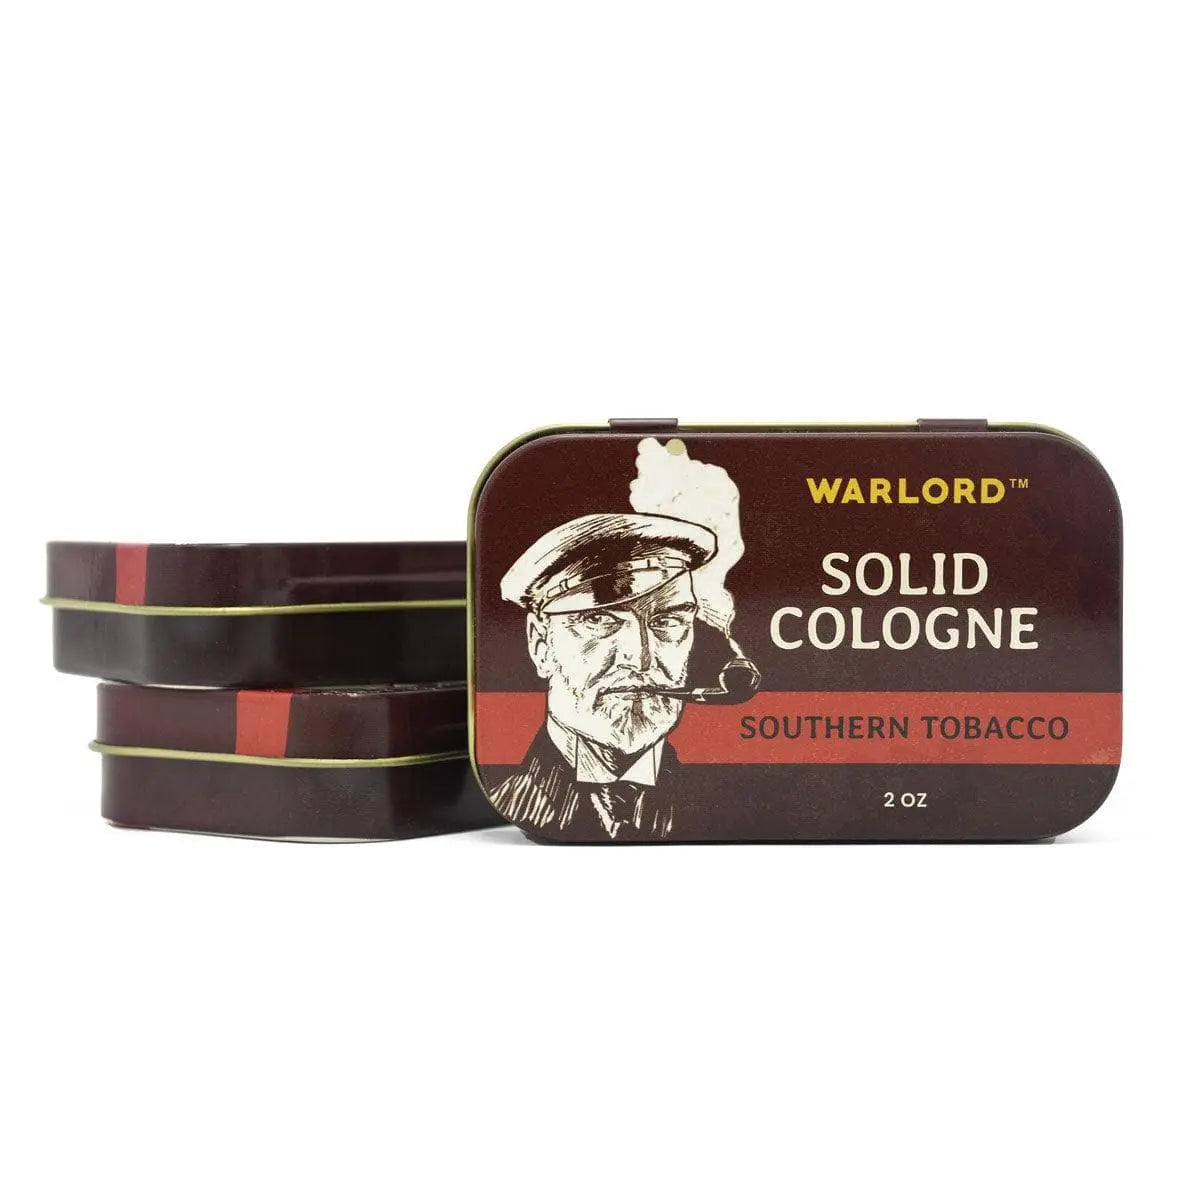 Solid Cologne - Southern Tobacco 2 oz.